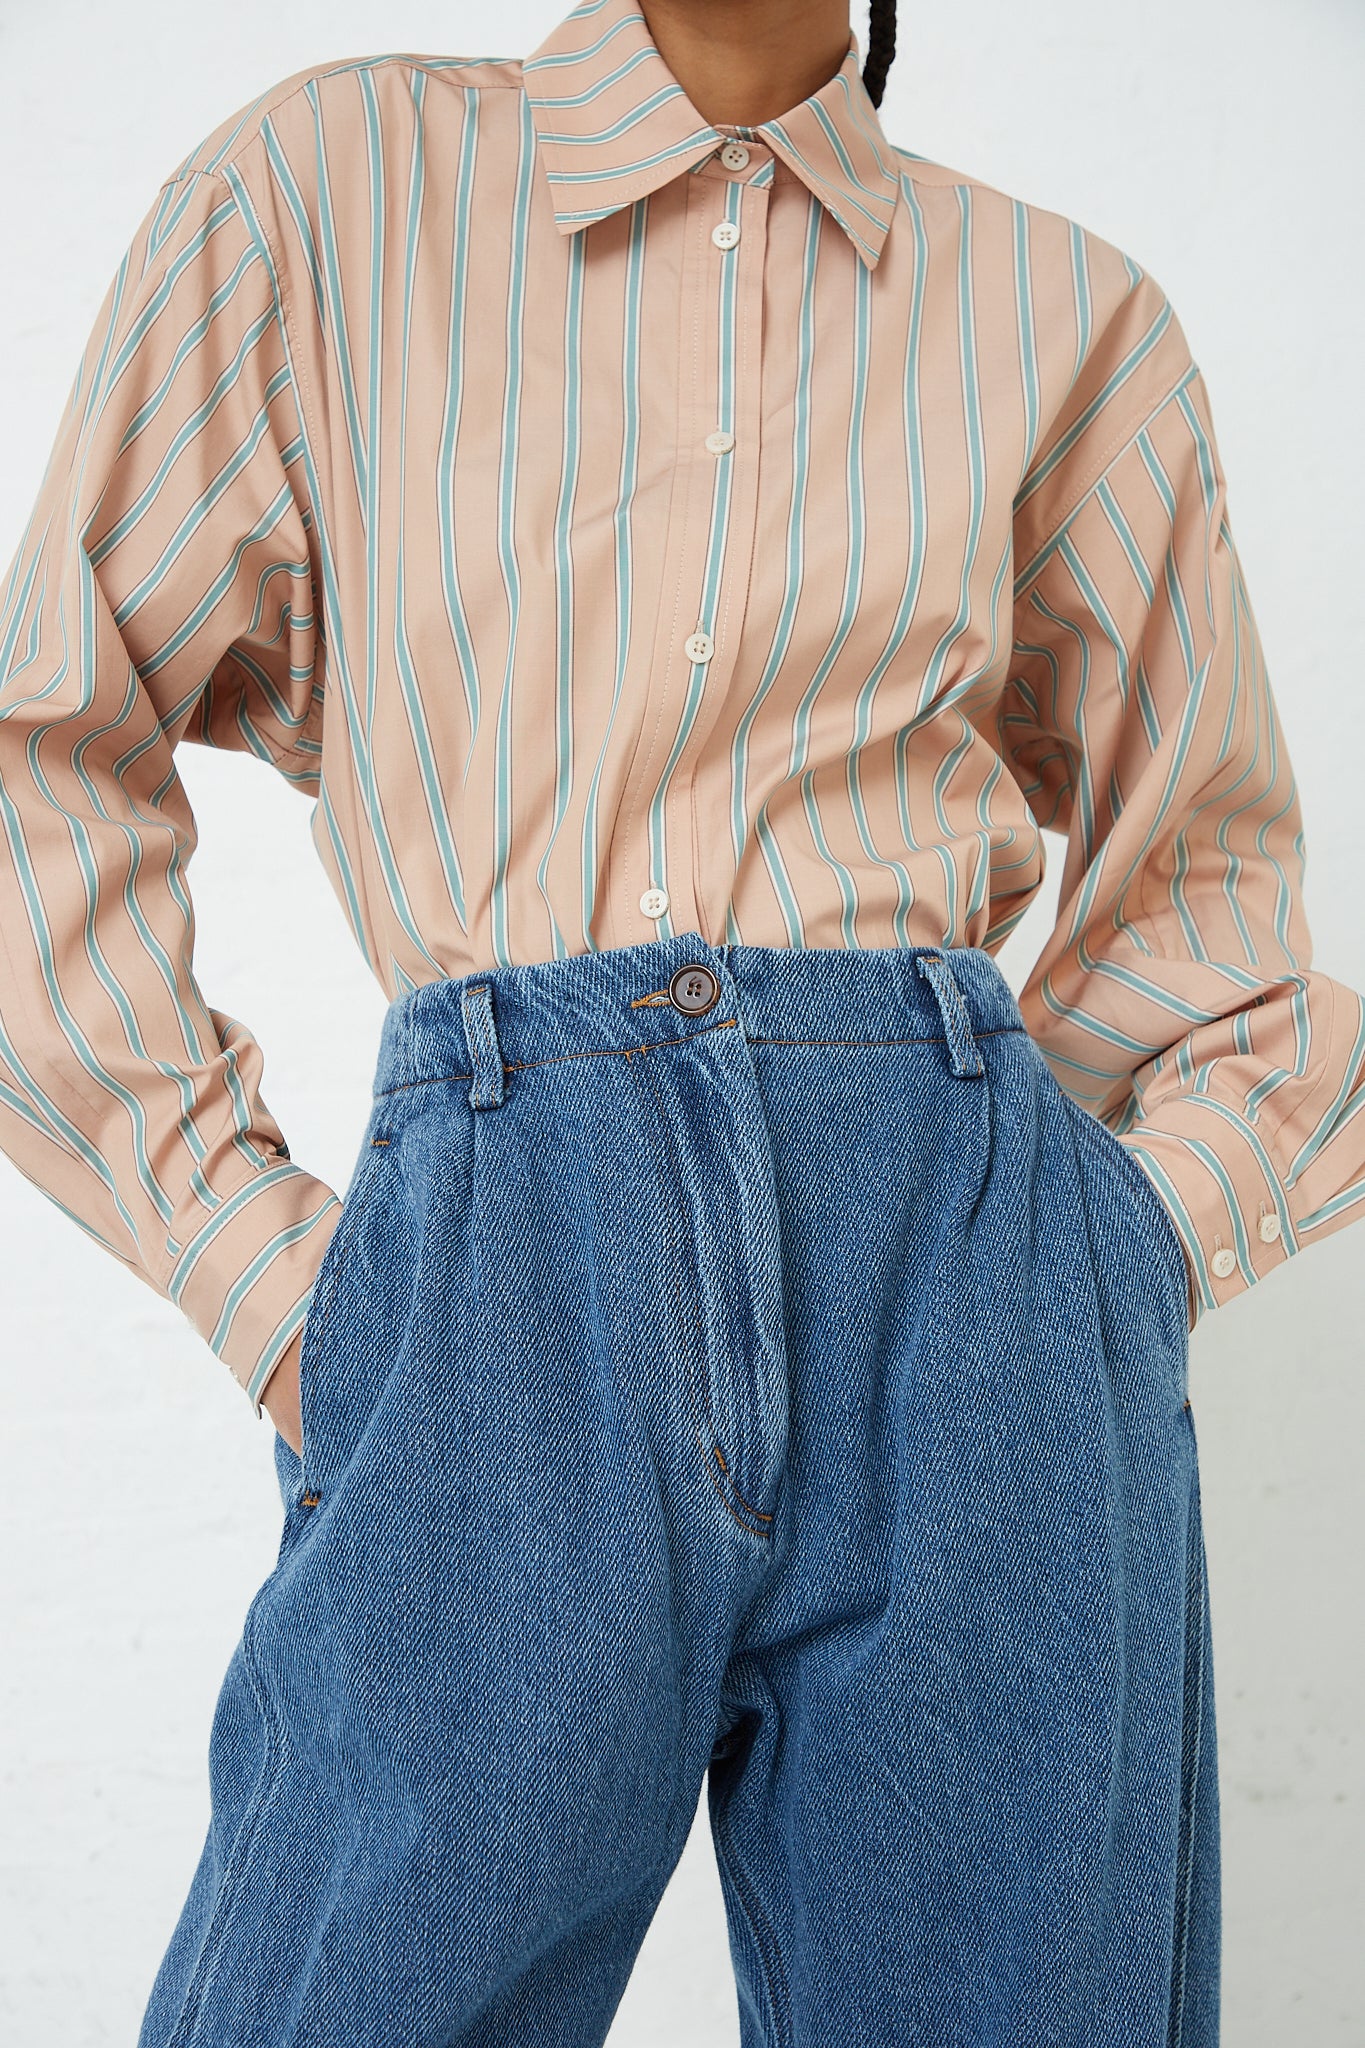 A woman wearing a striped shirt and Rachel Comey's Denim Percy Pant in Indigo.